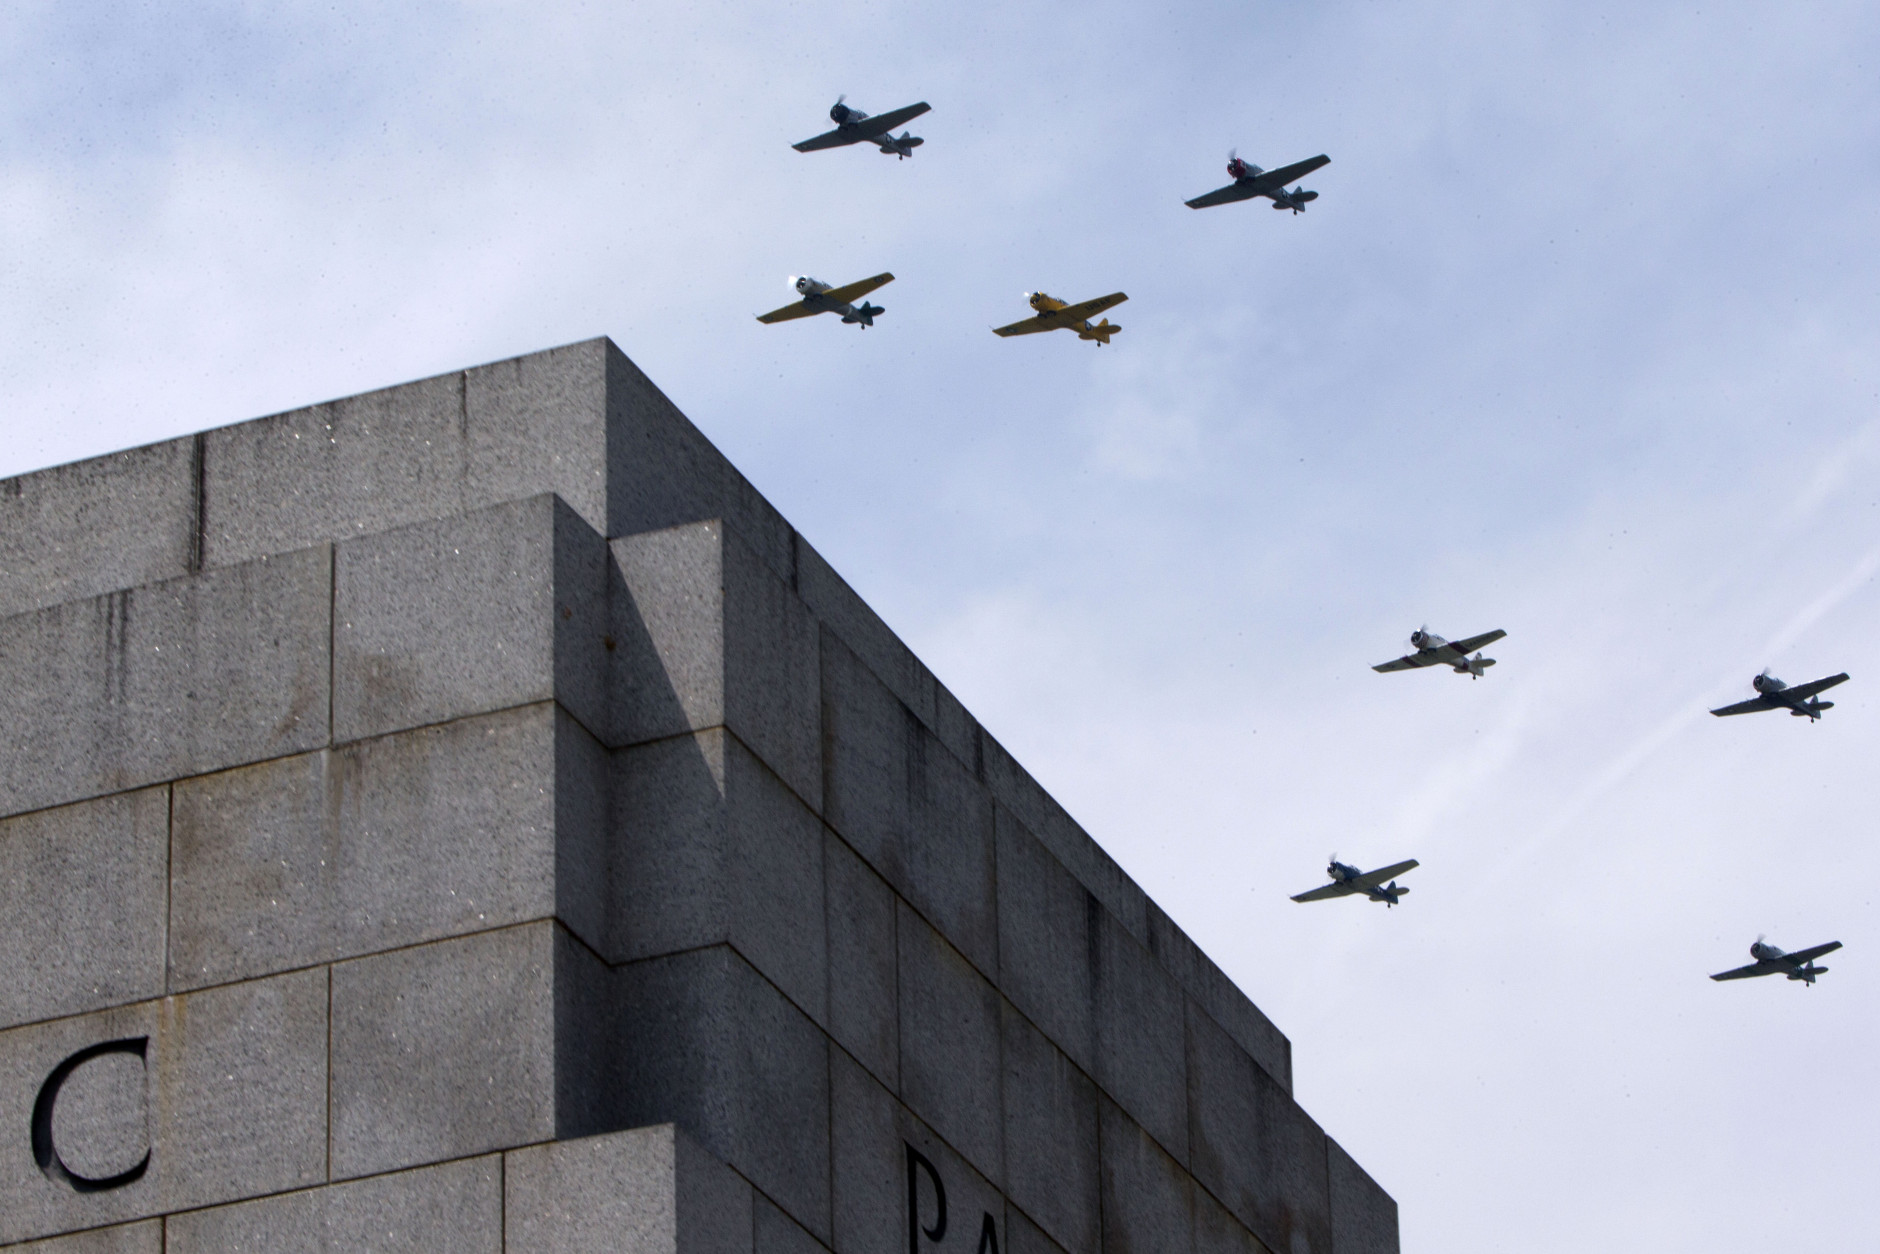 World War II aircraft fly over the World War II Memorial in Washington, Friday, May 8, 2015, in honor of the 70th anniversary of Victory in Europe Day (VE Day), during the Arsenal of Democracy: World War II Victory Capitol Flyover. The Flyover above the National Mall features historically sequenced formations of more than 50 vintage World War II aircraft. (AP Photo/Jacquelyn Martin)